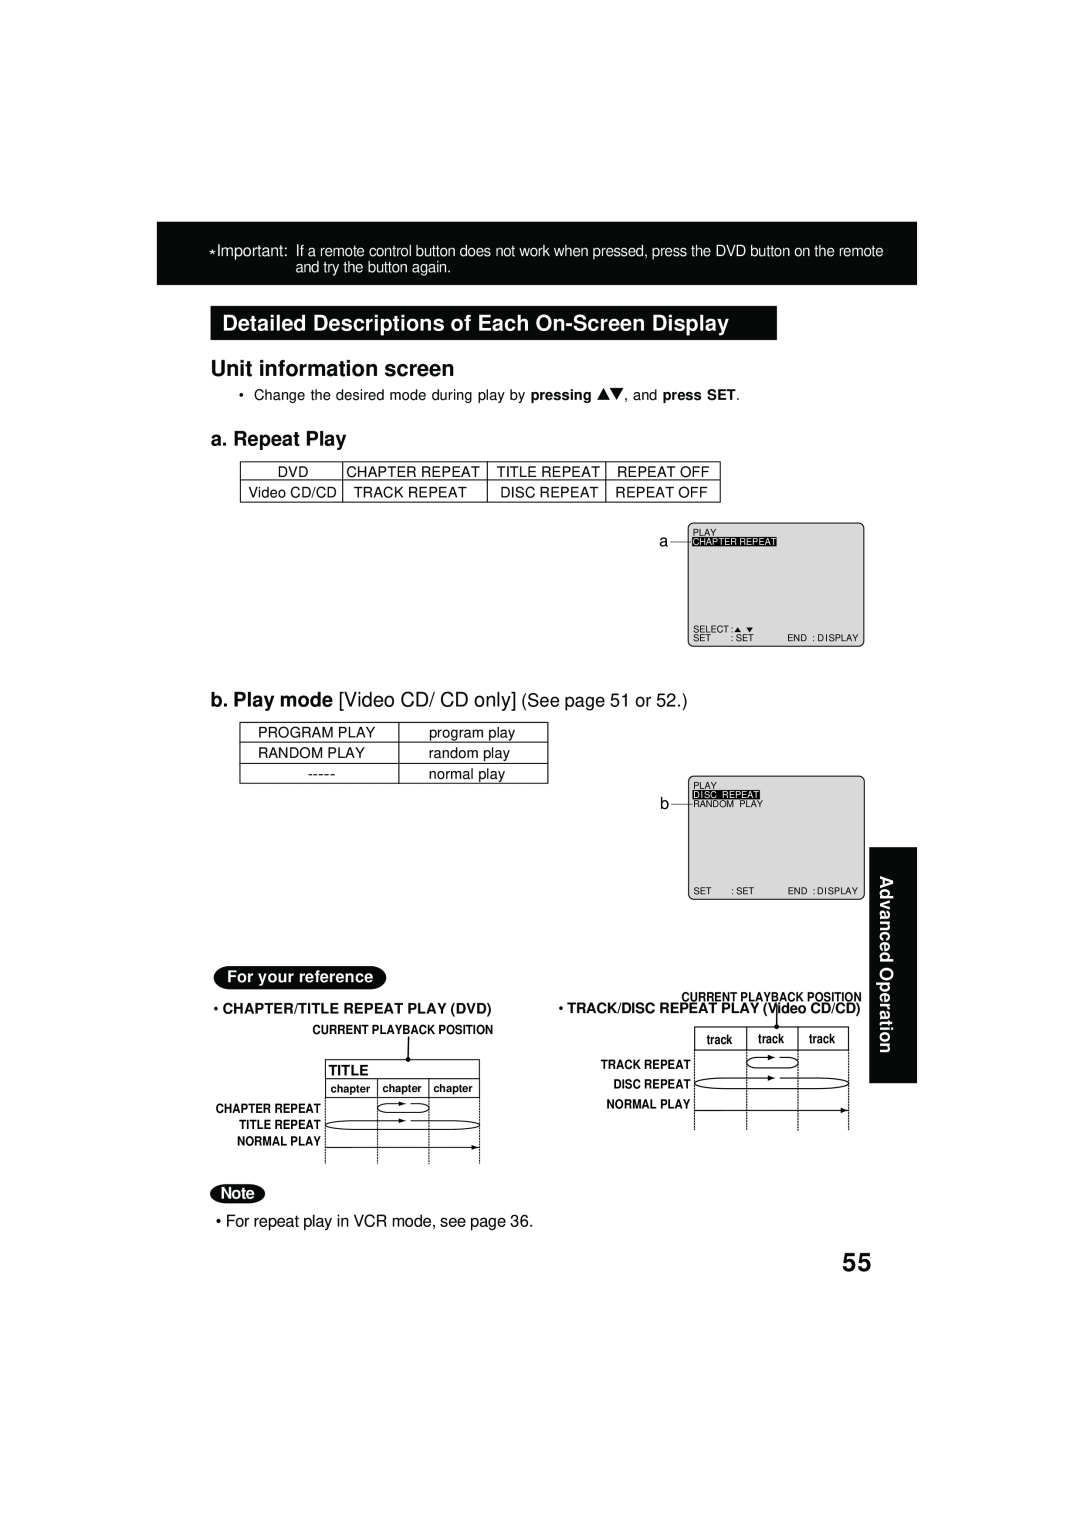 Panasonic PV DM2092 manual Unit information screen, a. Repeat Play, b. Play mode Video CD/ CD only See page 51 or, Title 